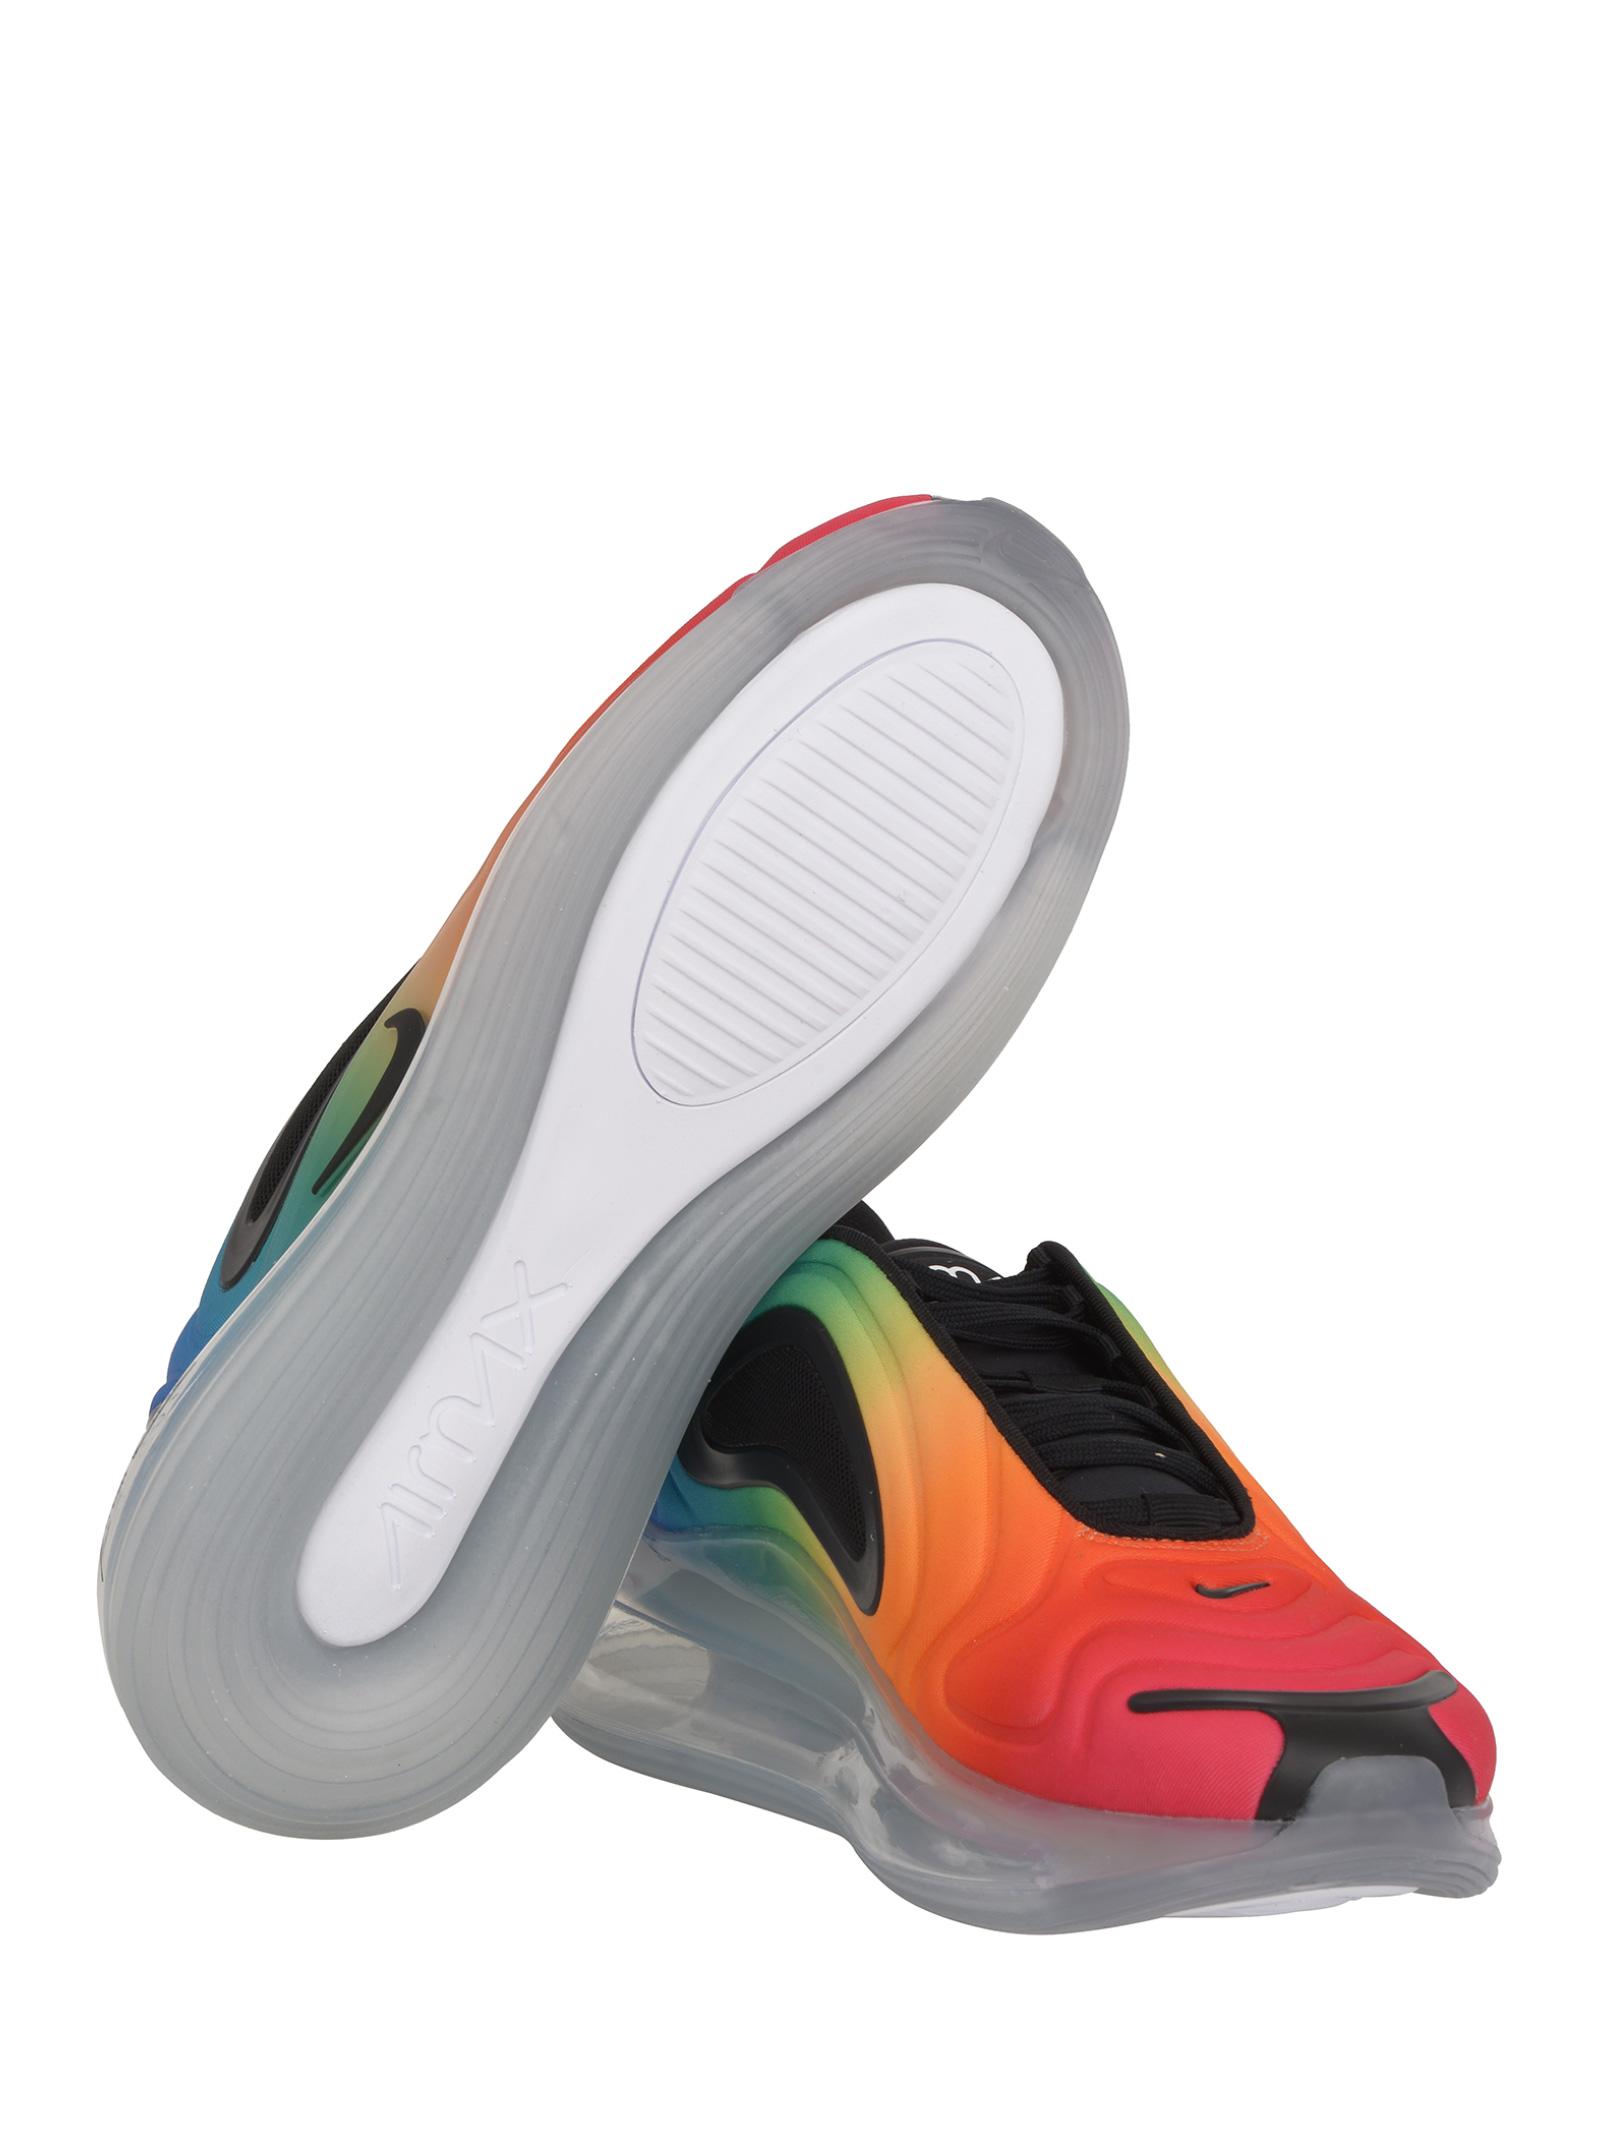 Nike Air Max 720 Betrue Sneakers In Rainbow Colors With Visible Air Unit.  for Men | Lyst